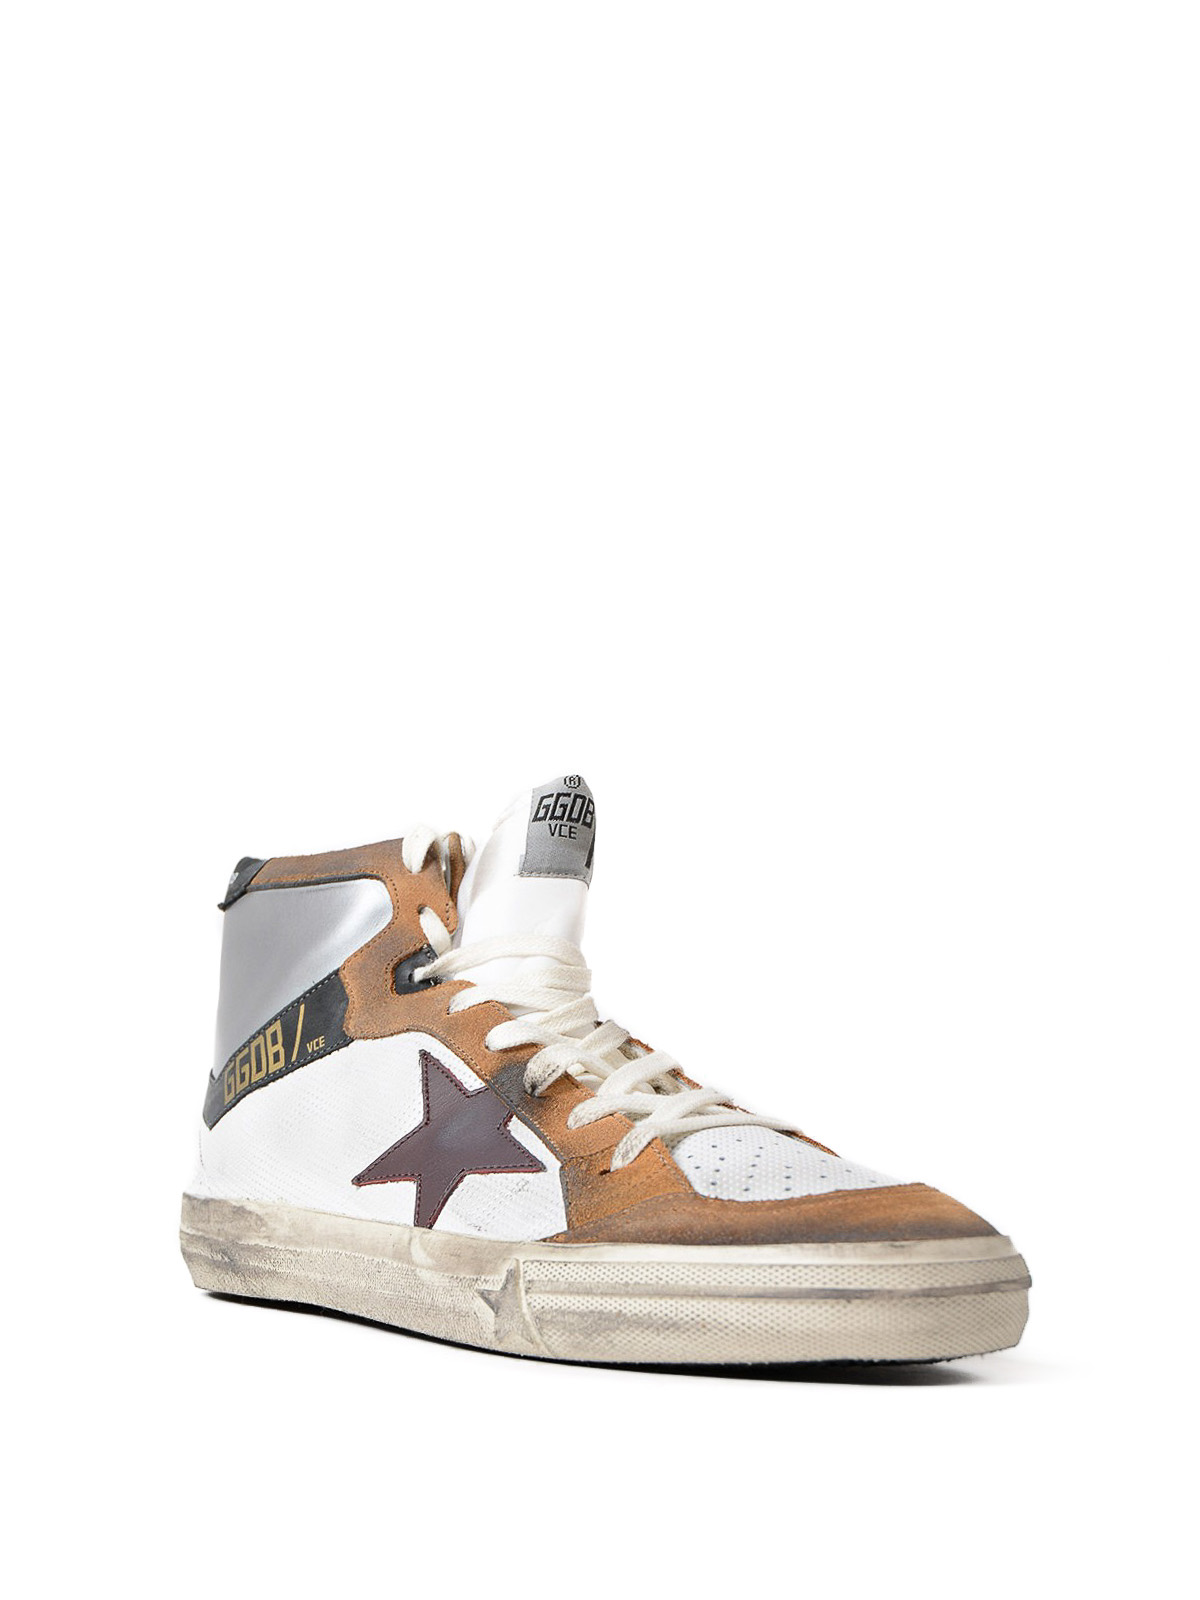 Trainers Golden Goose - 2.12 leather - G32MS599L2 | iKRIX.com